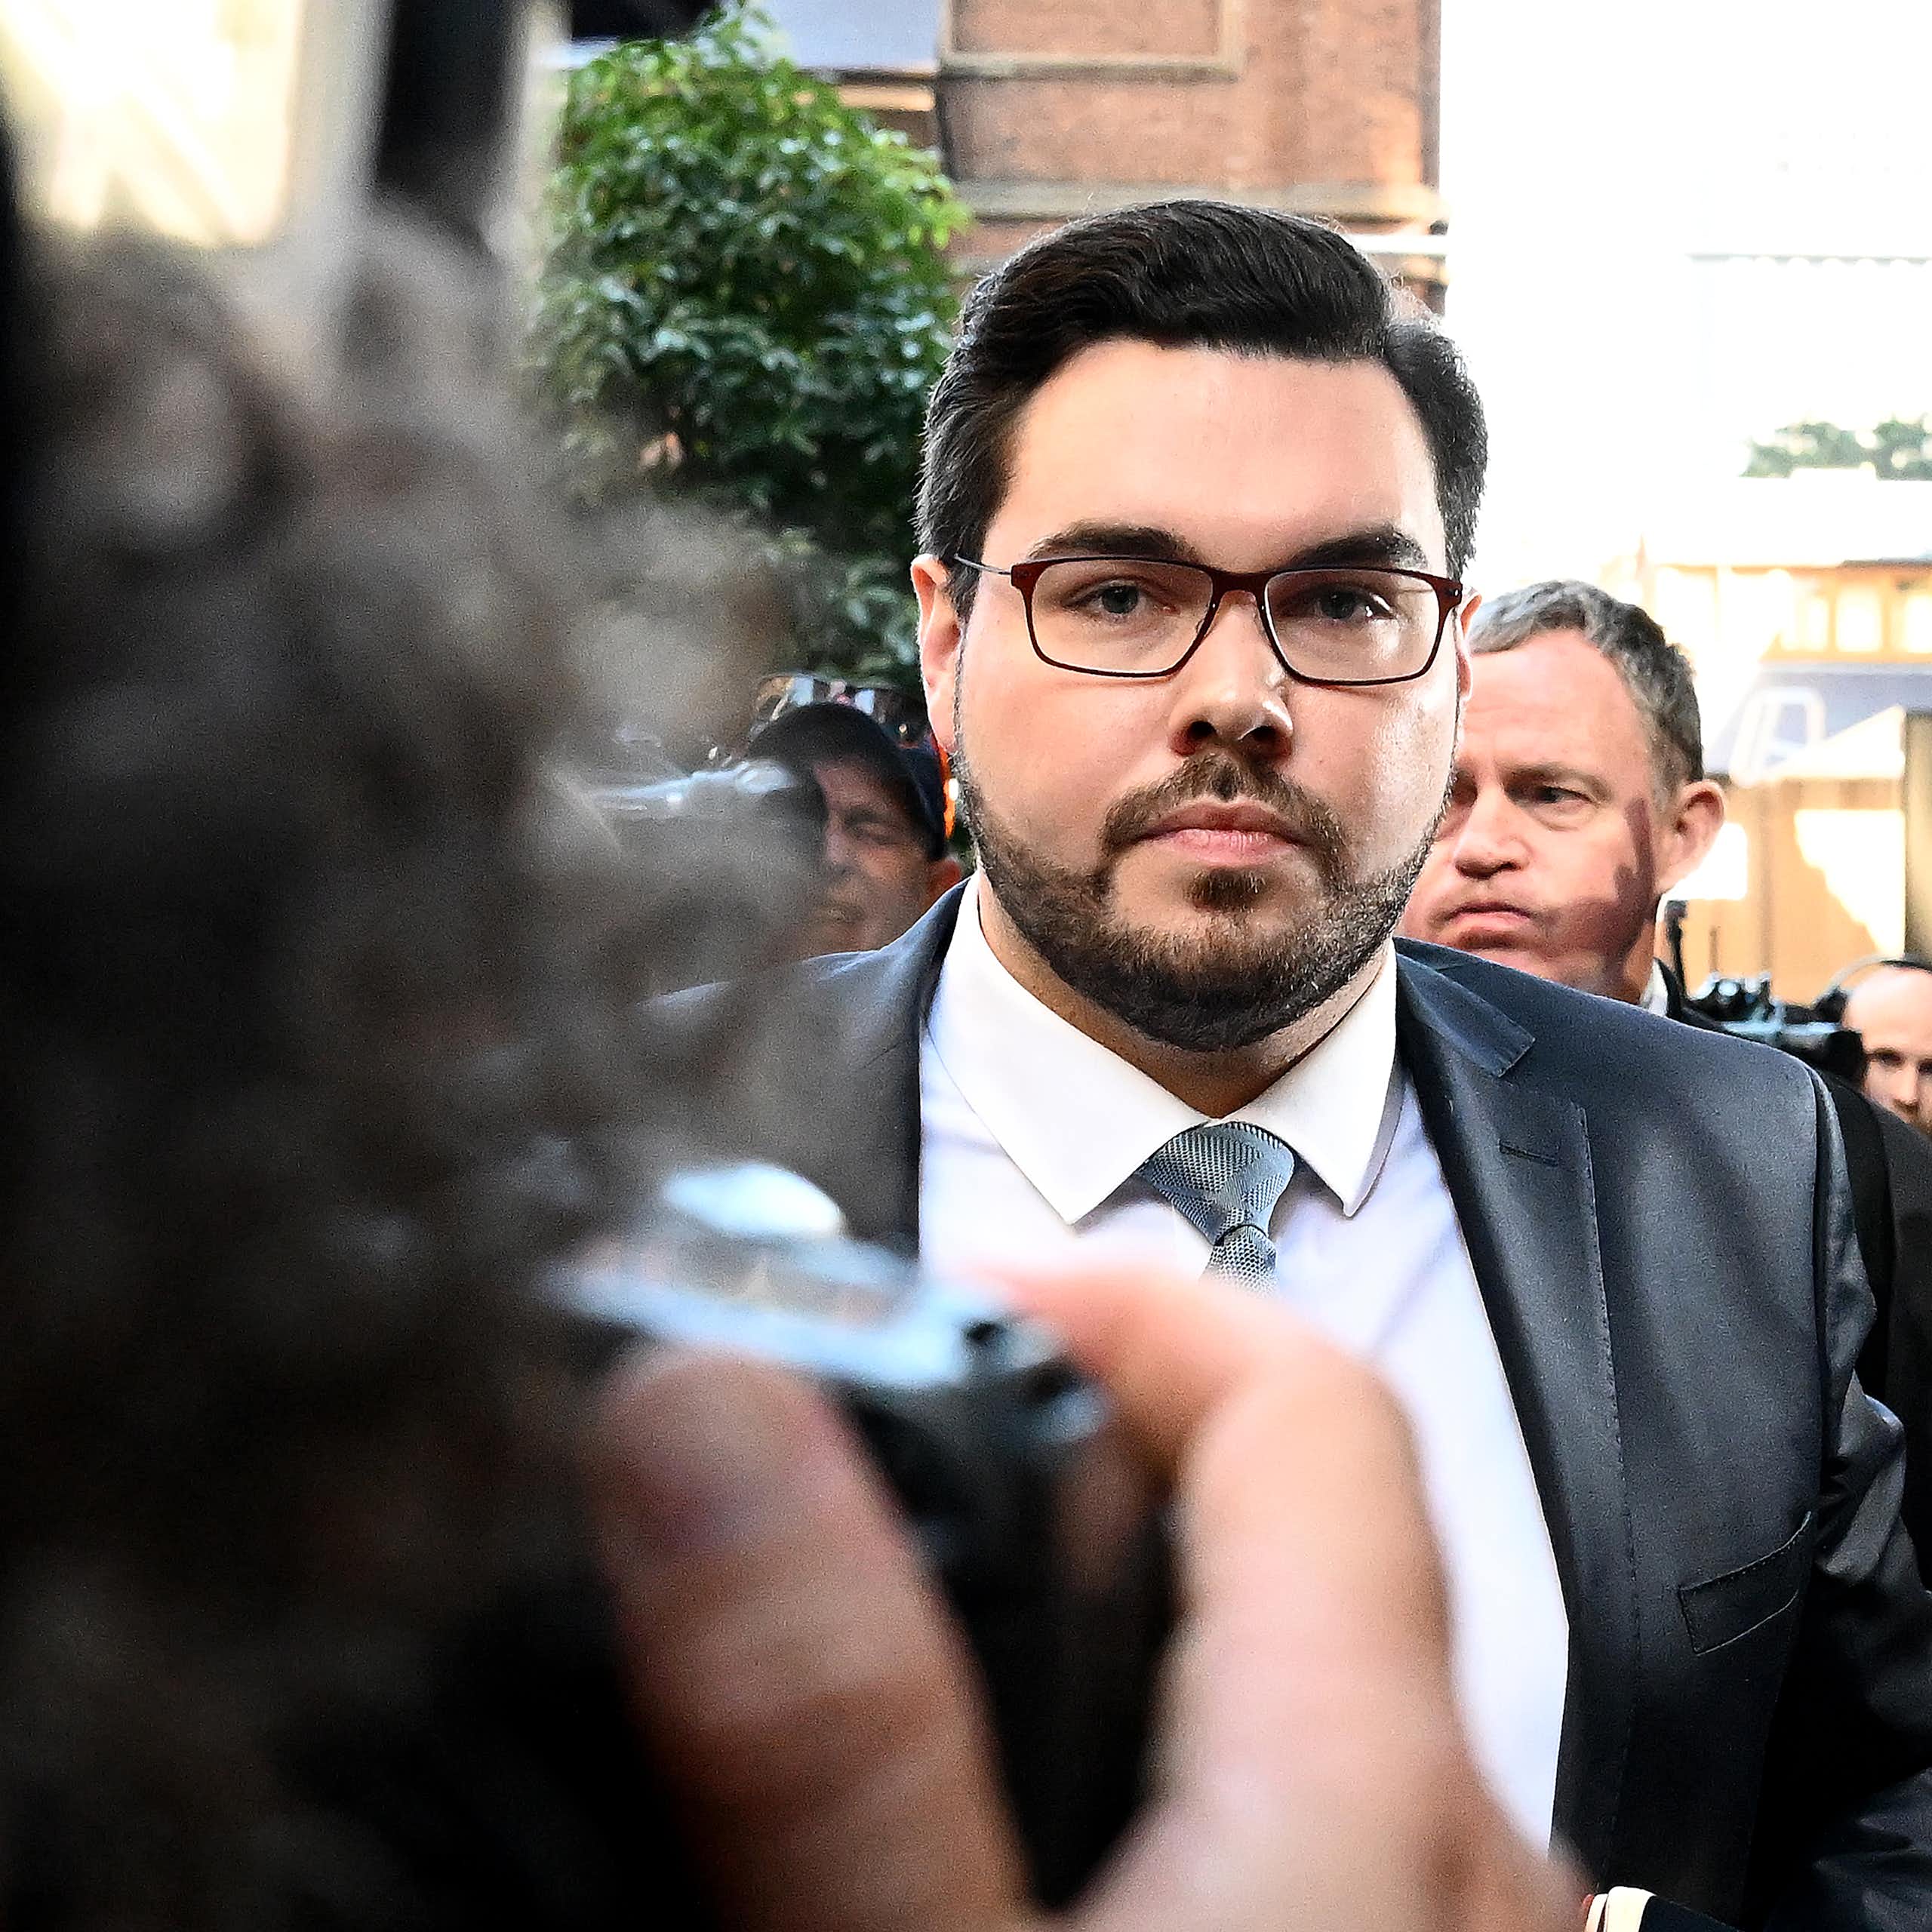 A man in glasses and a suit and tie walks outside surrounded by media cameras